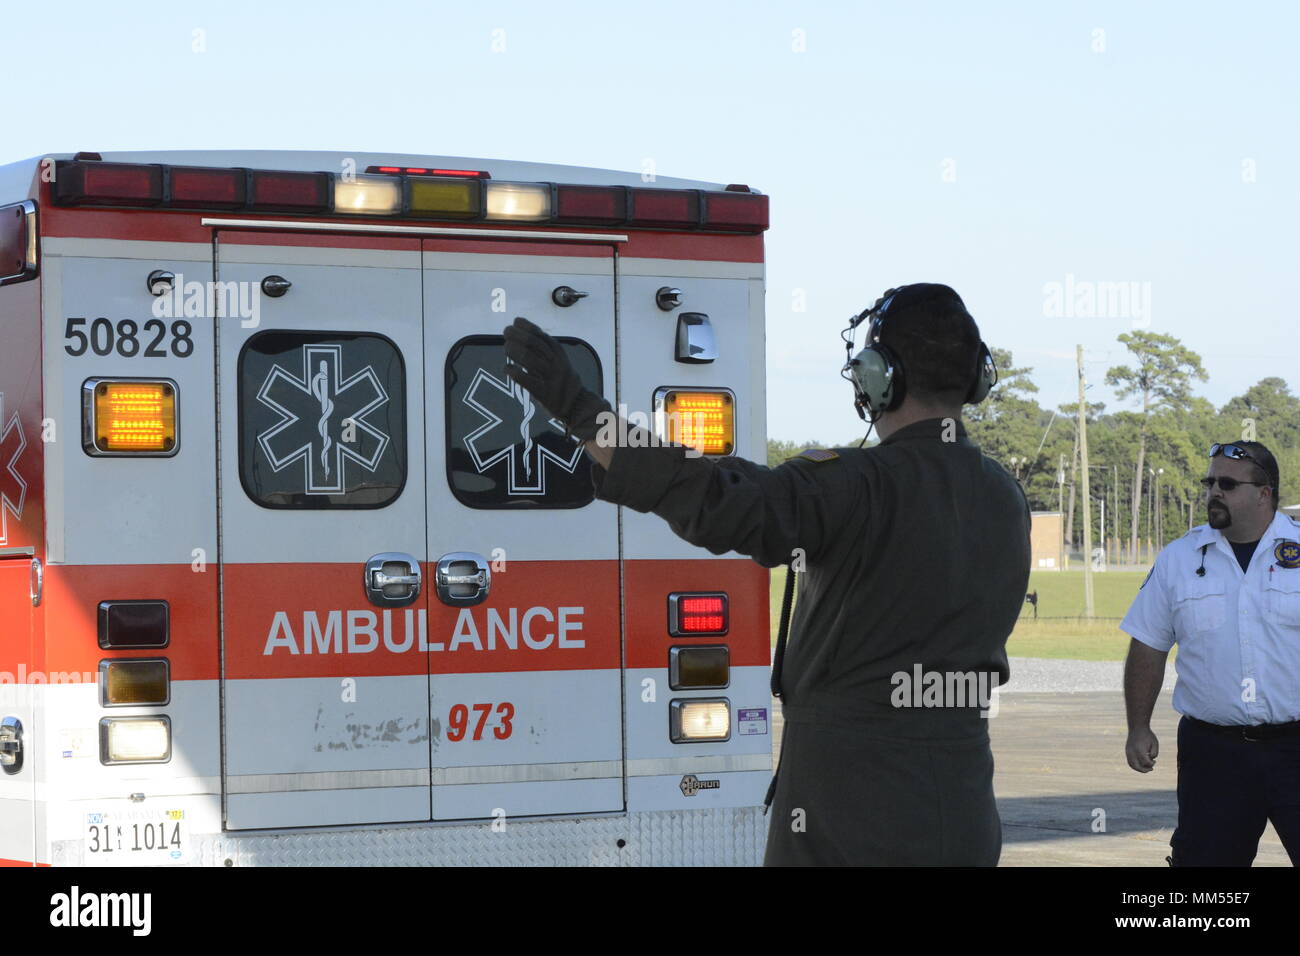 A member of the 156th Aeromedical Evacuation Squadron guides an ambulance belonging to first responders from the Gadsden Alabama Fire Department to the back of a C-130 Hercules carrying patients evacuated from Key West Florida, while at the Northeast Alabama Regional Airport, Gadsden Alabama, Sept. 6, 2017. The patients were evacuated prior to the arrival of Hurricane Irma, a category five storm that is expected to cause catastrophic damage to the regions it makes landfall. The 156th Aeromedical Evacuation Squadron of the North Carolina Air National Guard provides medical care for wounded indi Stock Photo